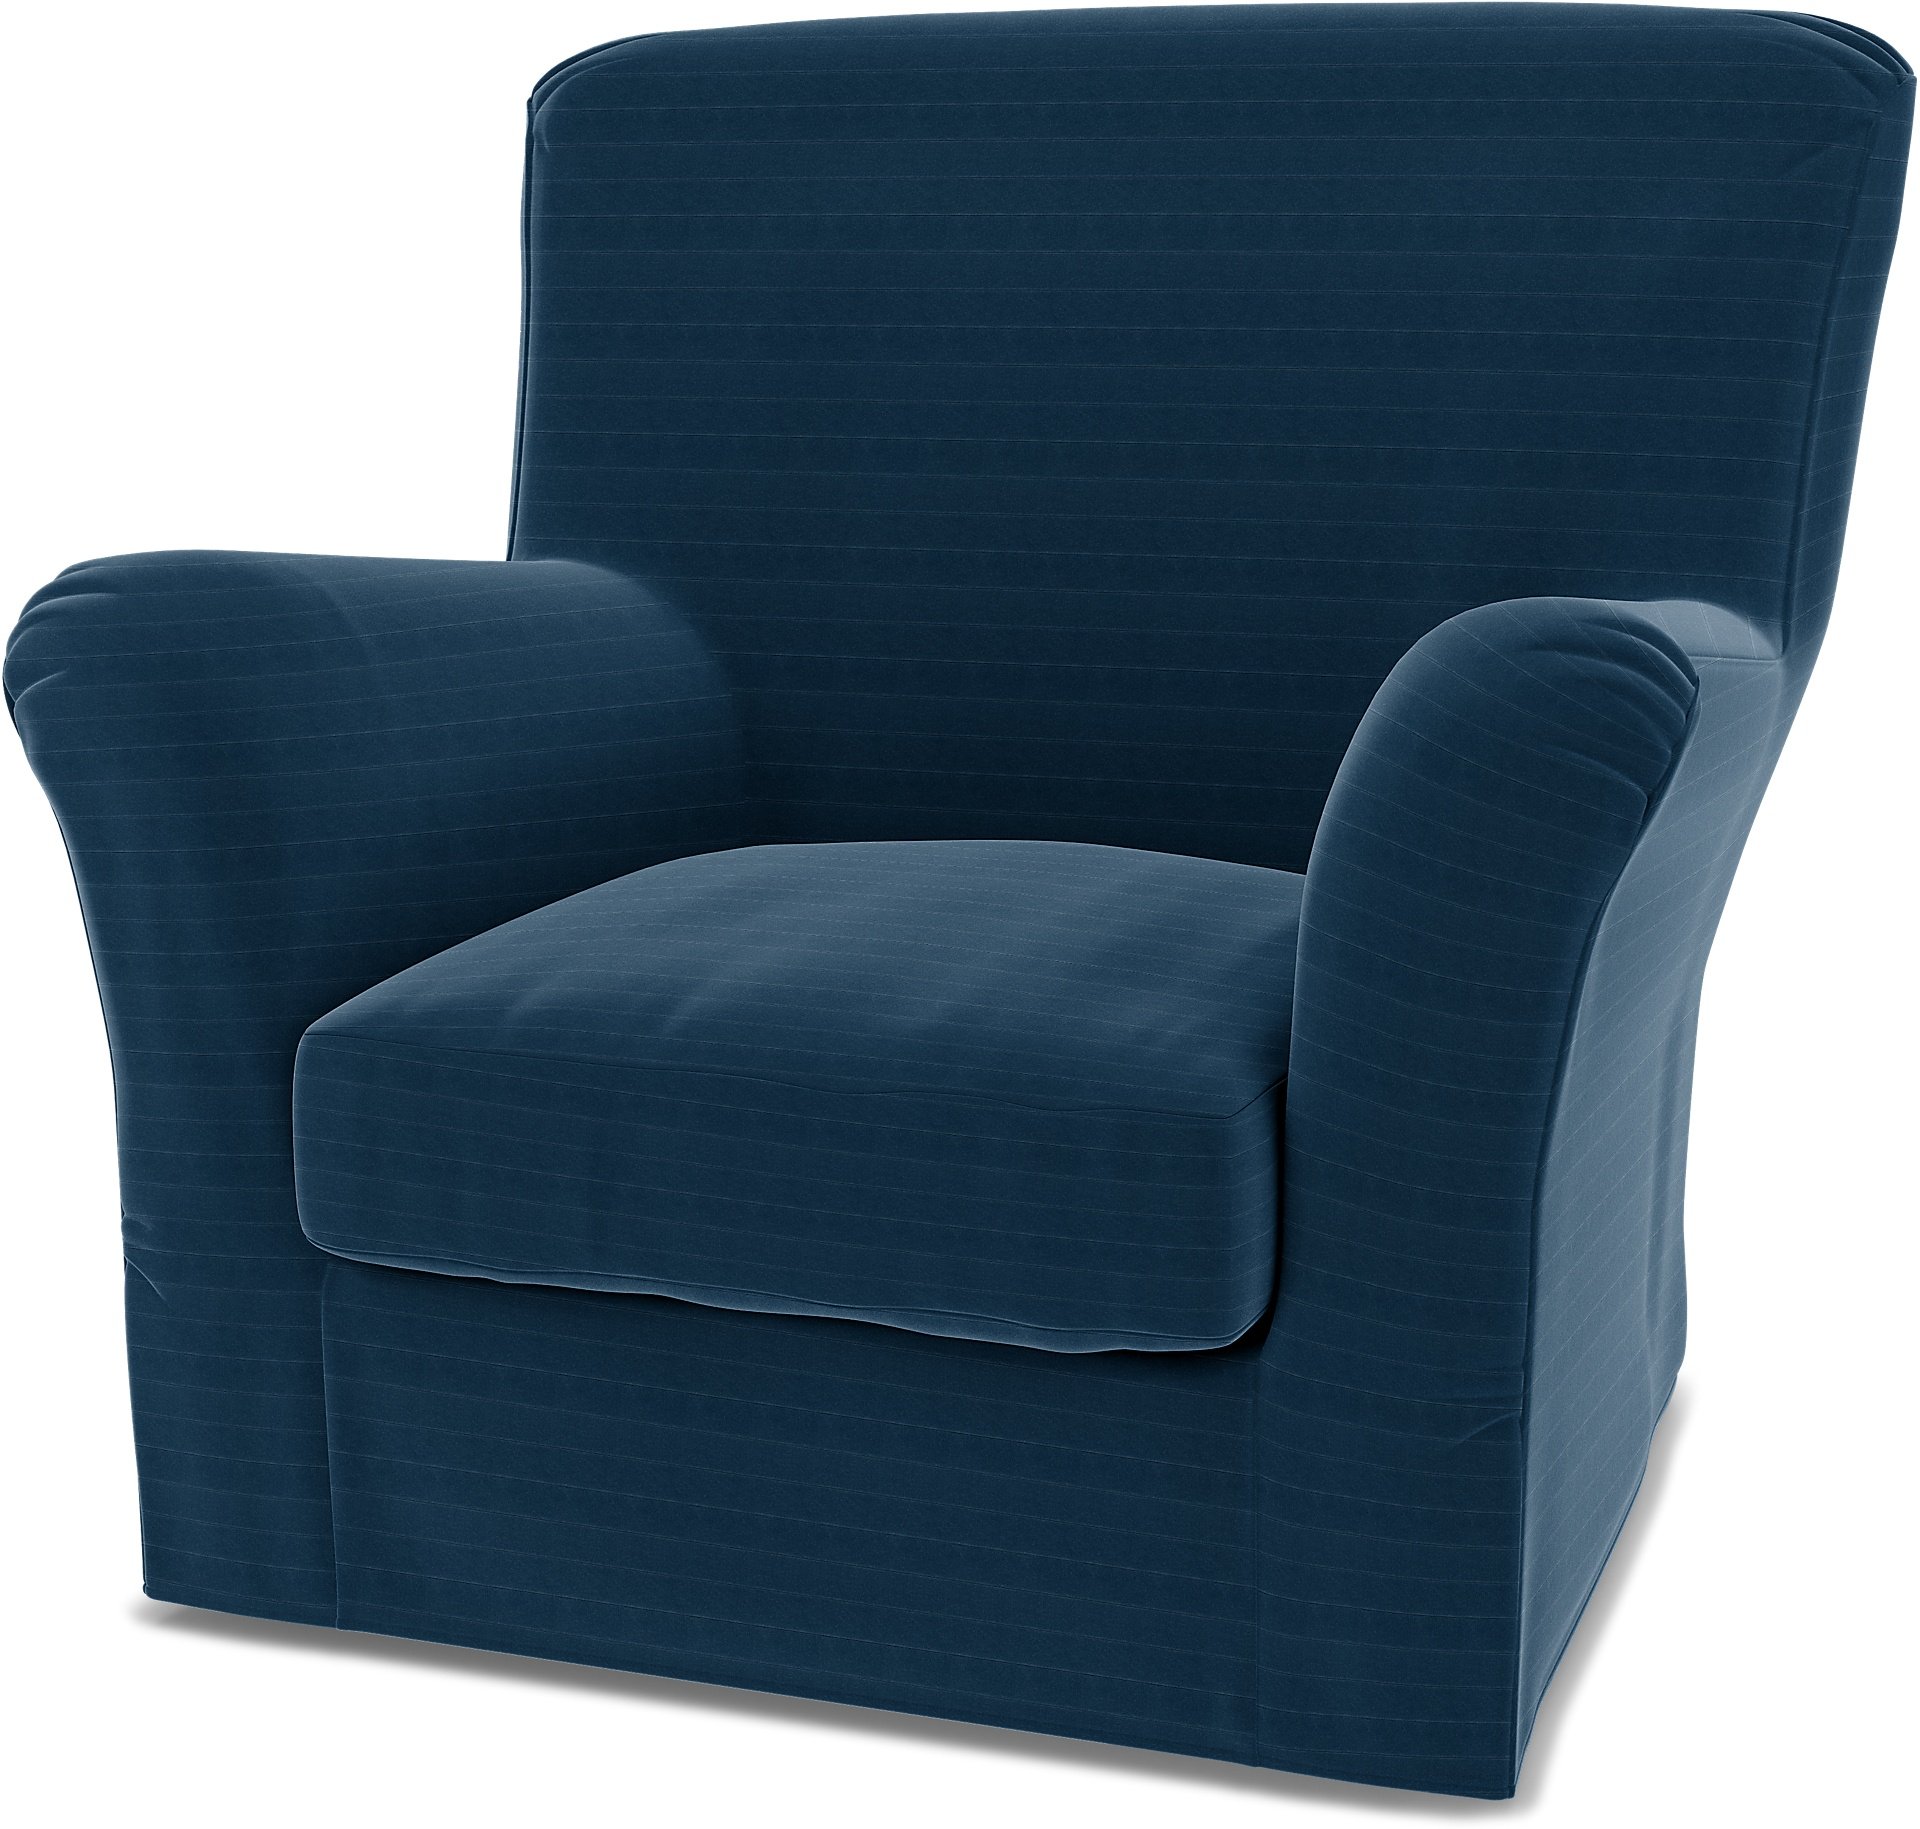 IKEA - Tomelilla High Back Armchair Cover (Standard model), Denim Blue, Moody Seventies Collection -